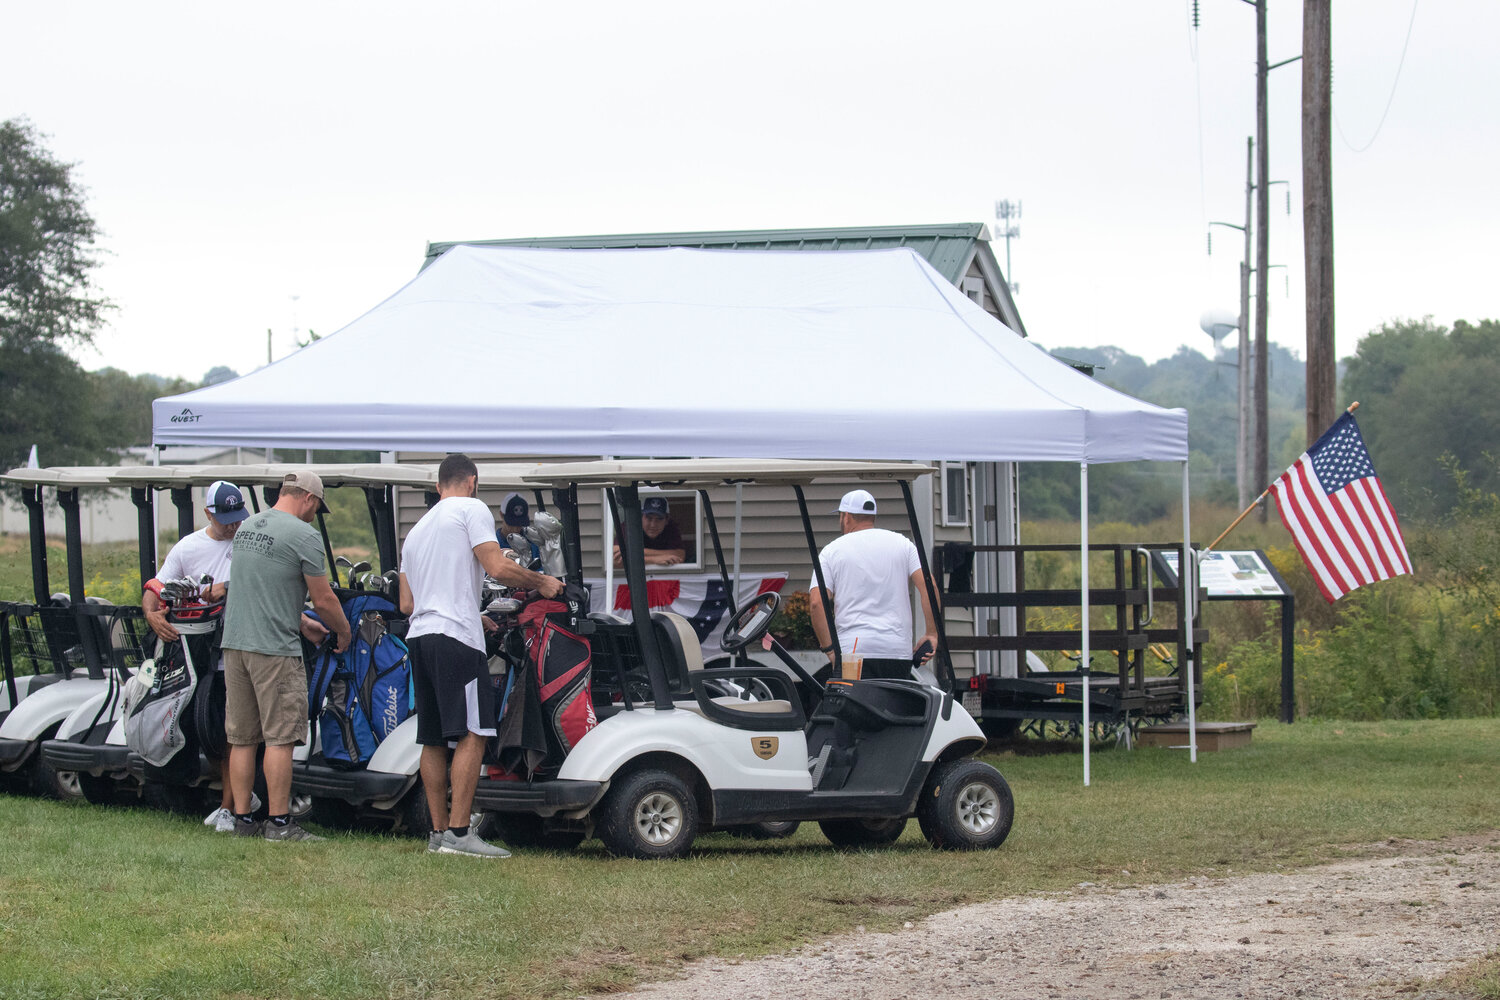 Golfers get ready at the mobile club house to go out on the greens.